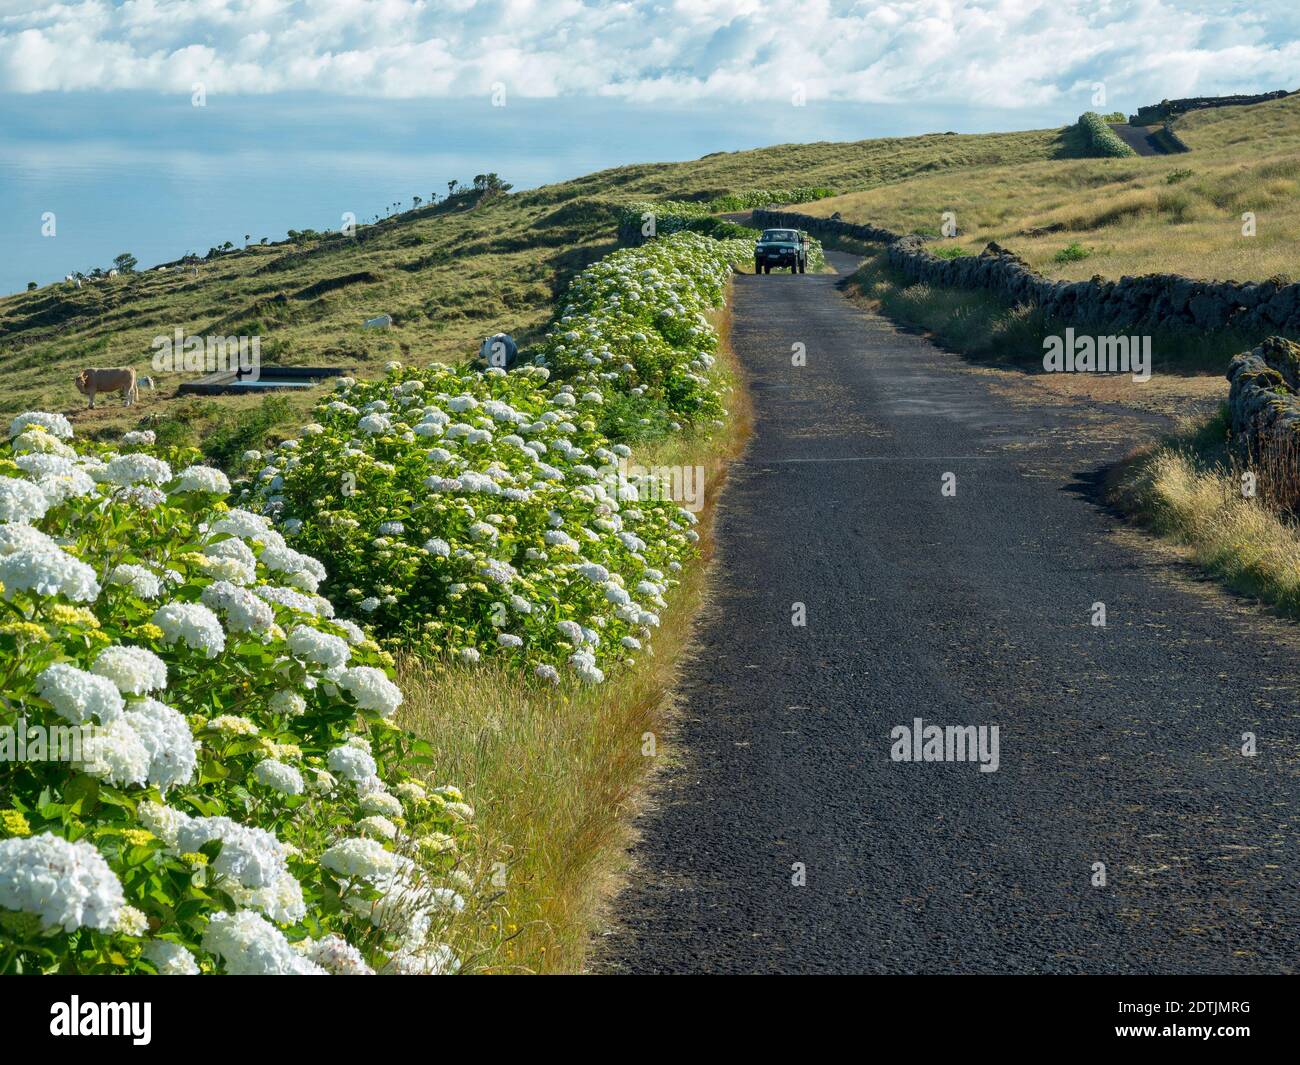 Hedge of Hortensia (Hydrangea macrophylla), an introduced plant, at roadside.  Pico Island, an island in the Azores (Ilhas dos Acores) in the Atlantic Stock Photo